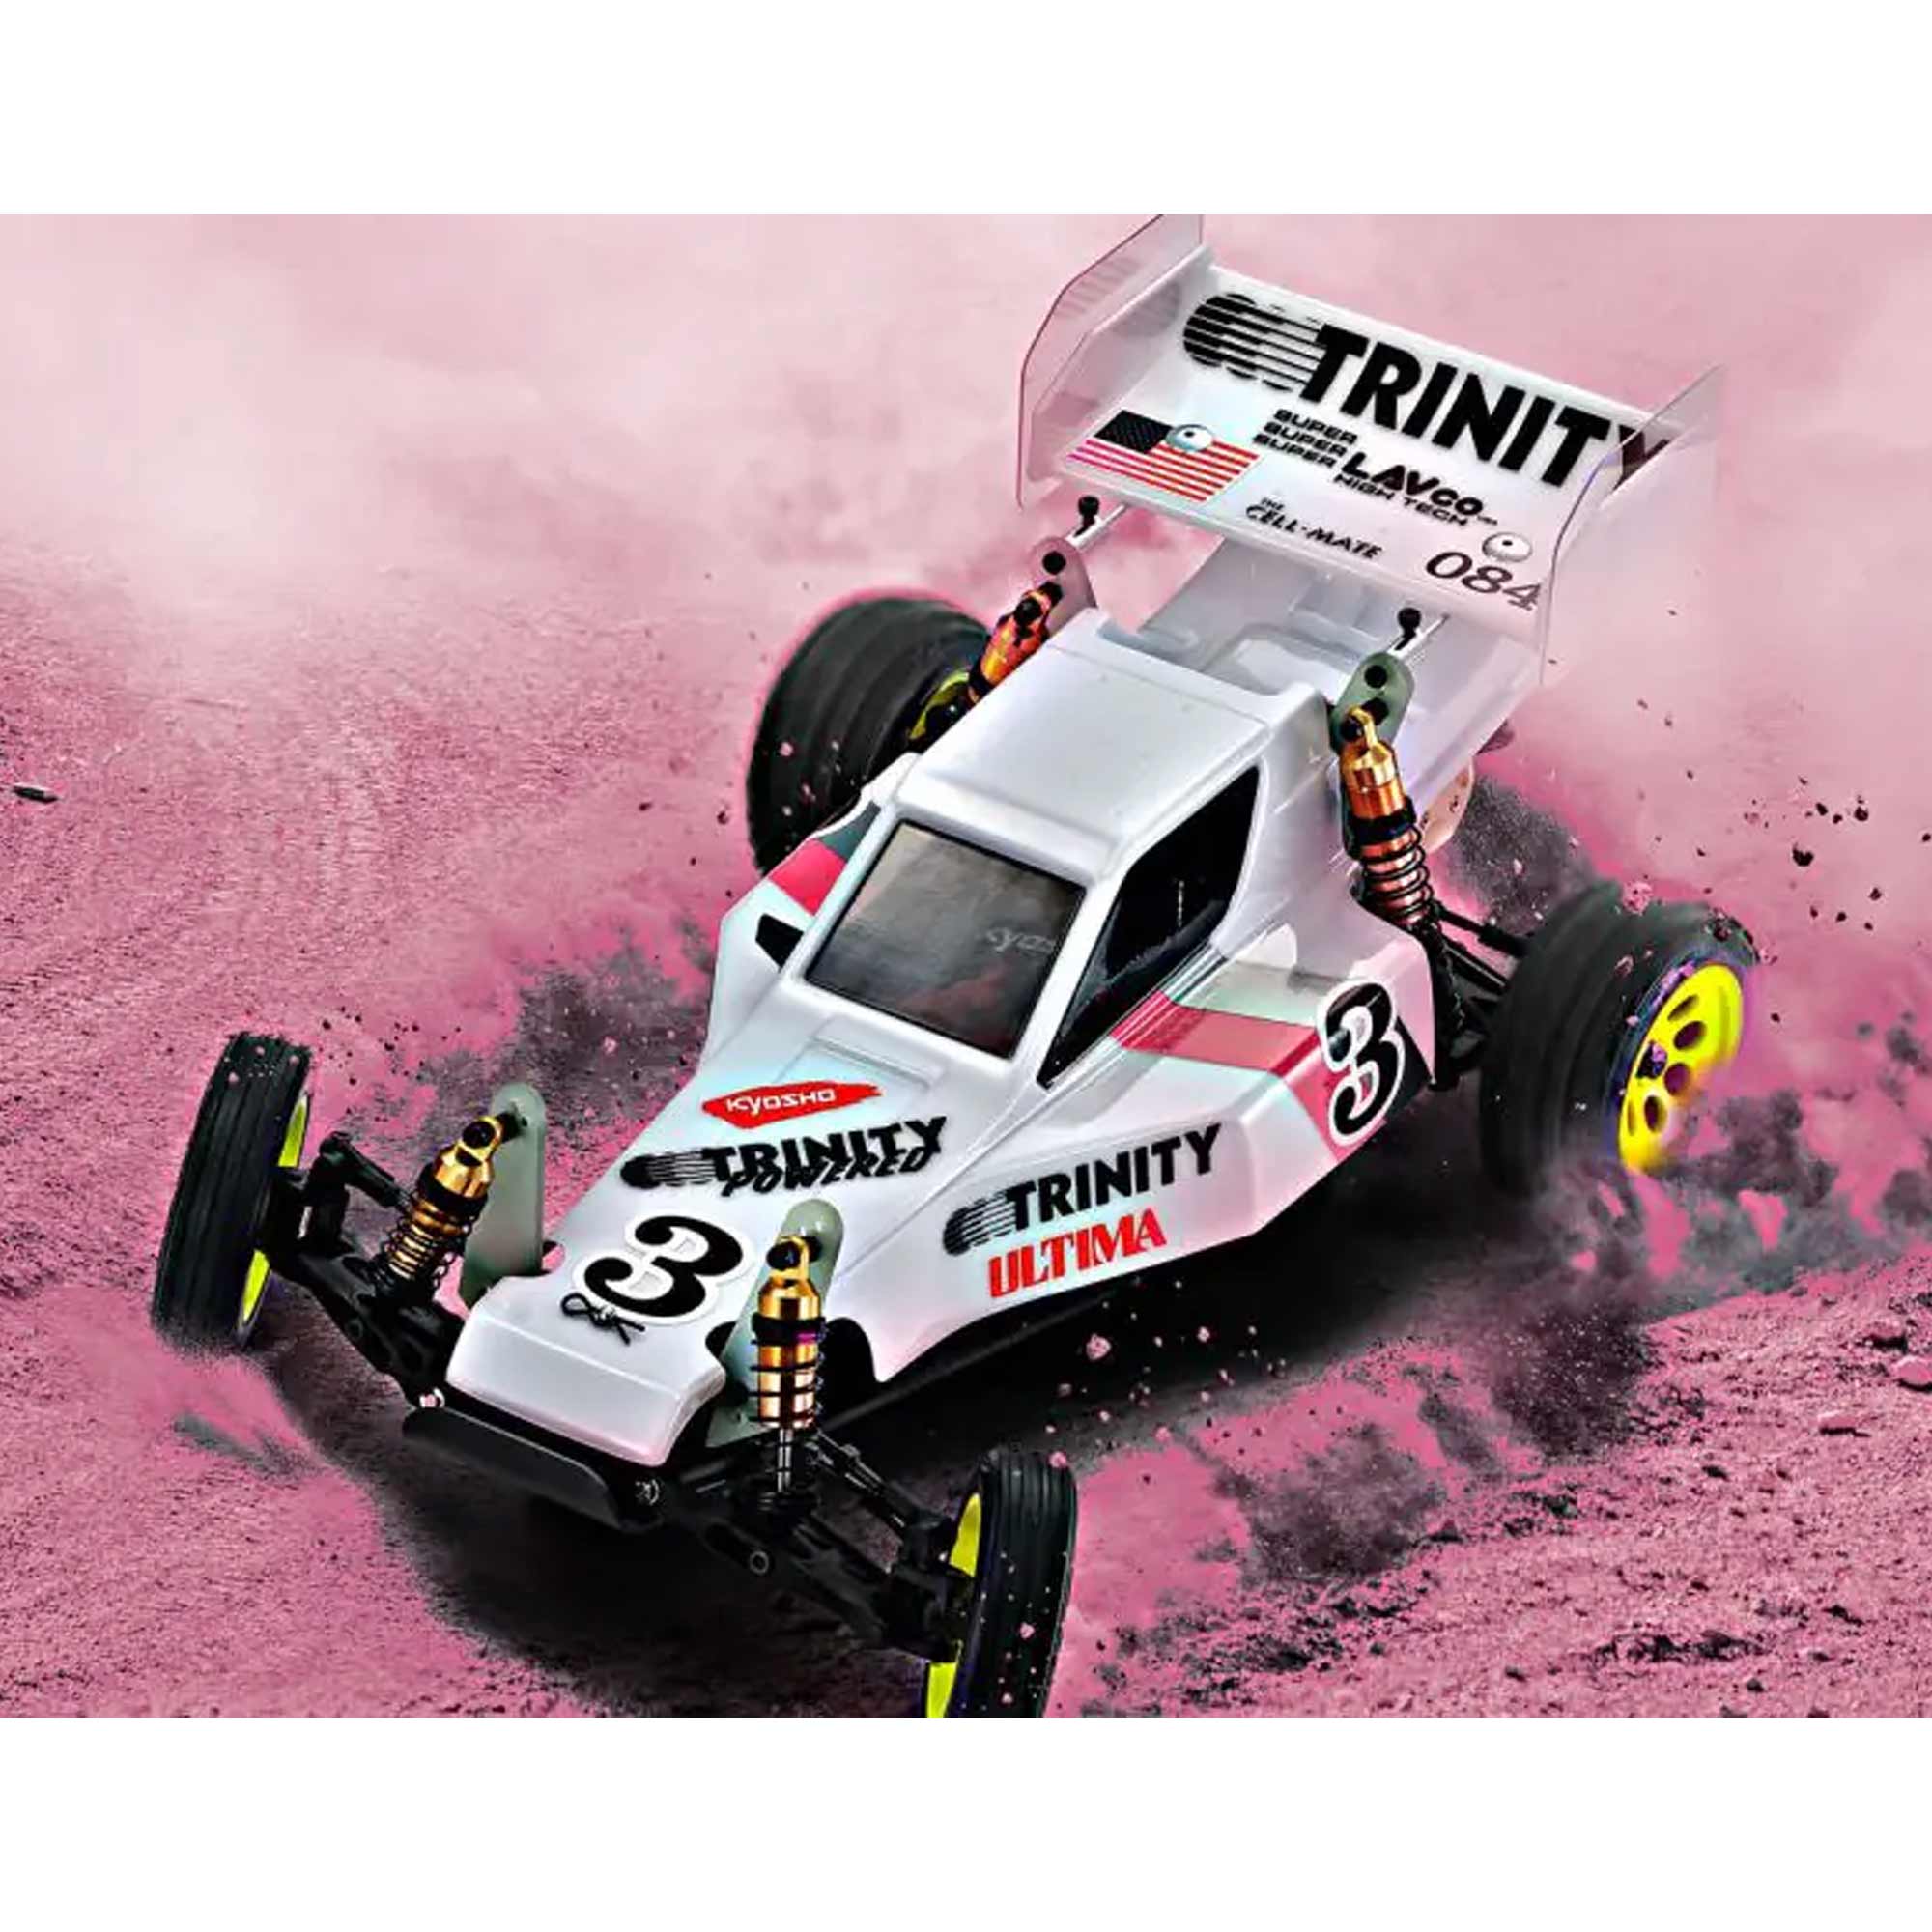 1/10 '87 JJ Ultima 60th Anniversary Electric 2WD Off-Road Buggy Kit (LIMITED EDITION)